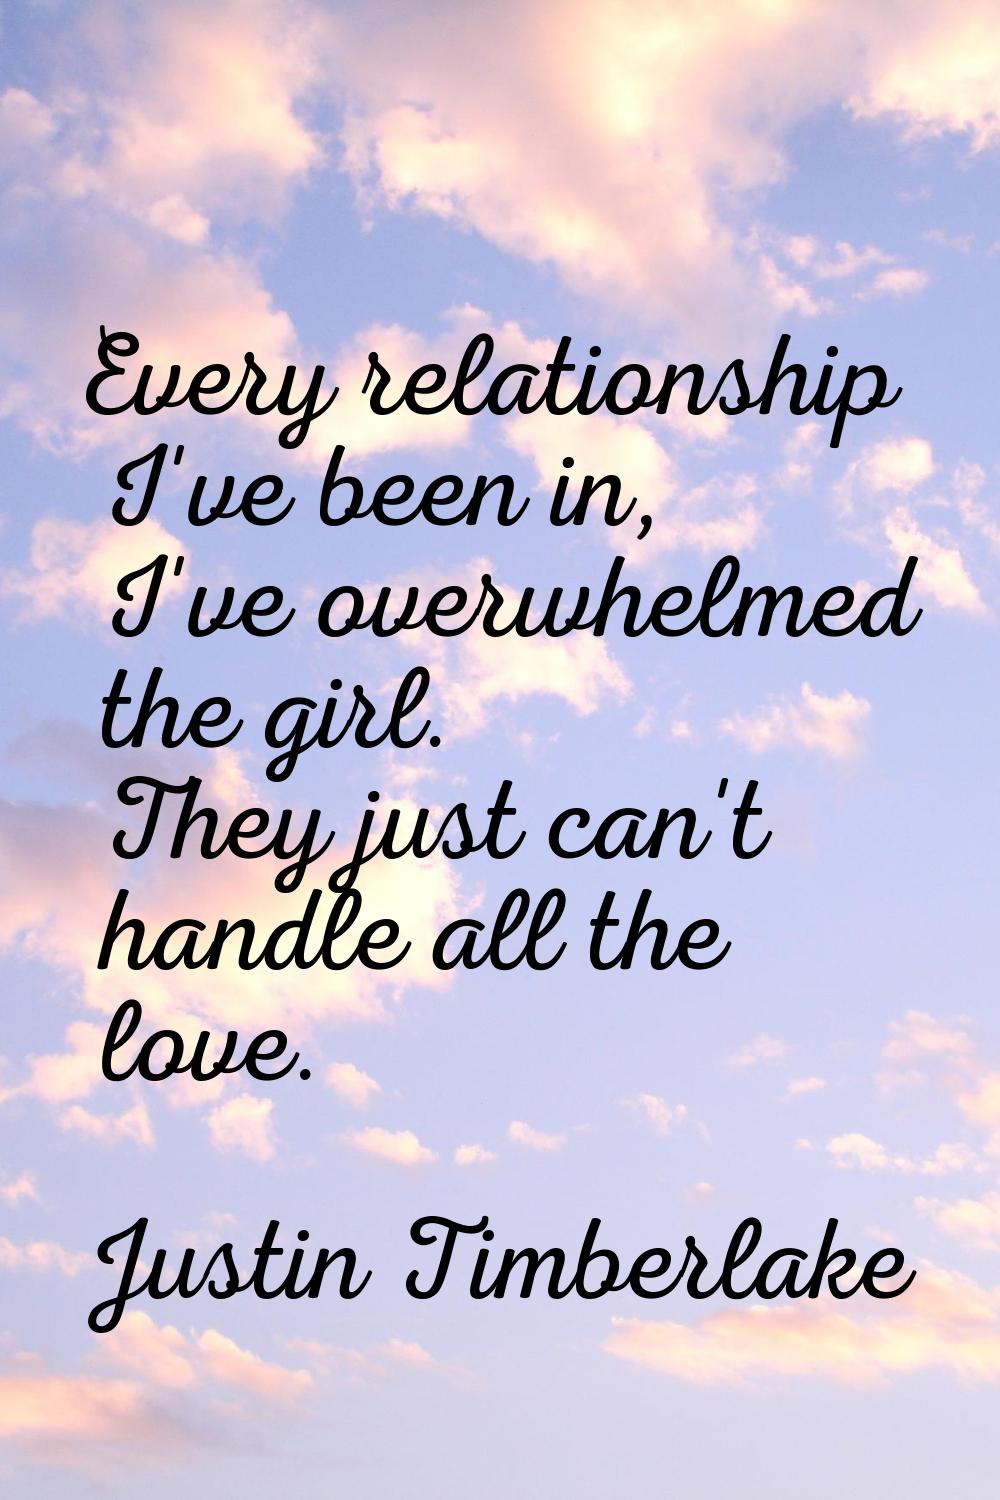 Every relationship I've been in, I've overwhelmed the girl. They just can't handle all the love.